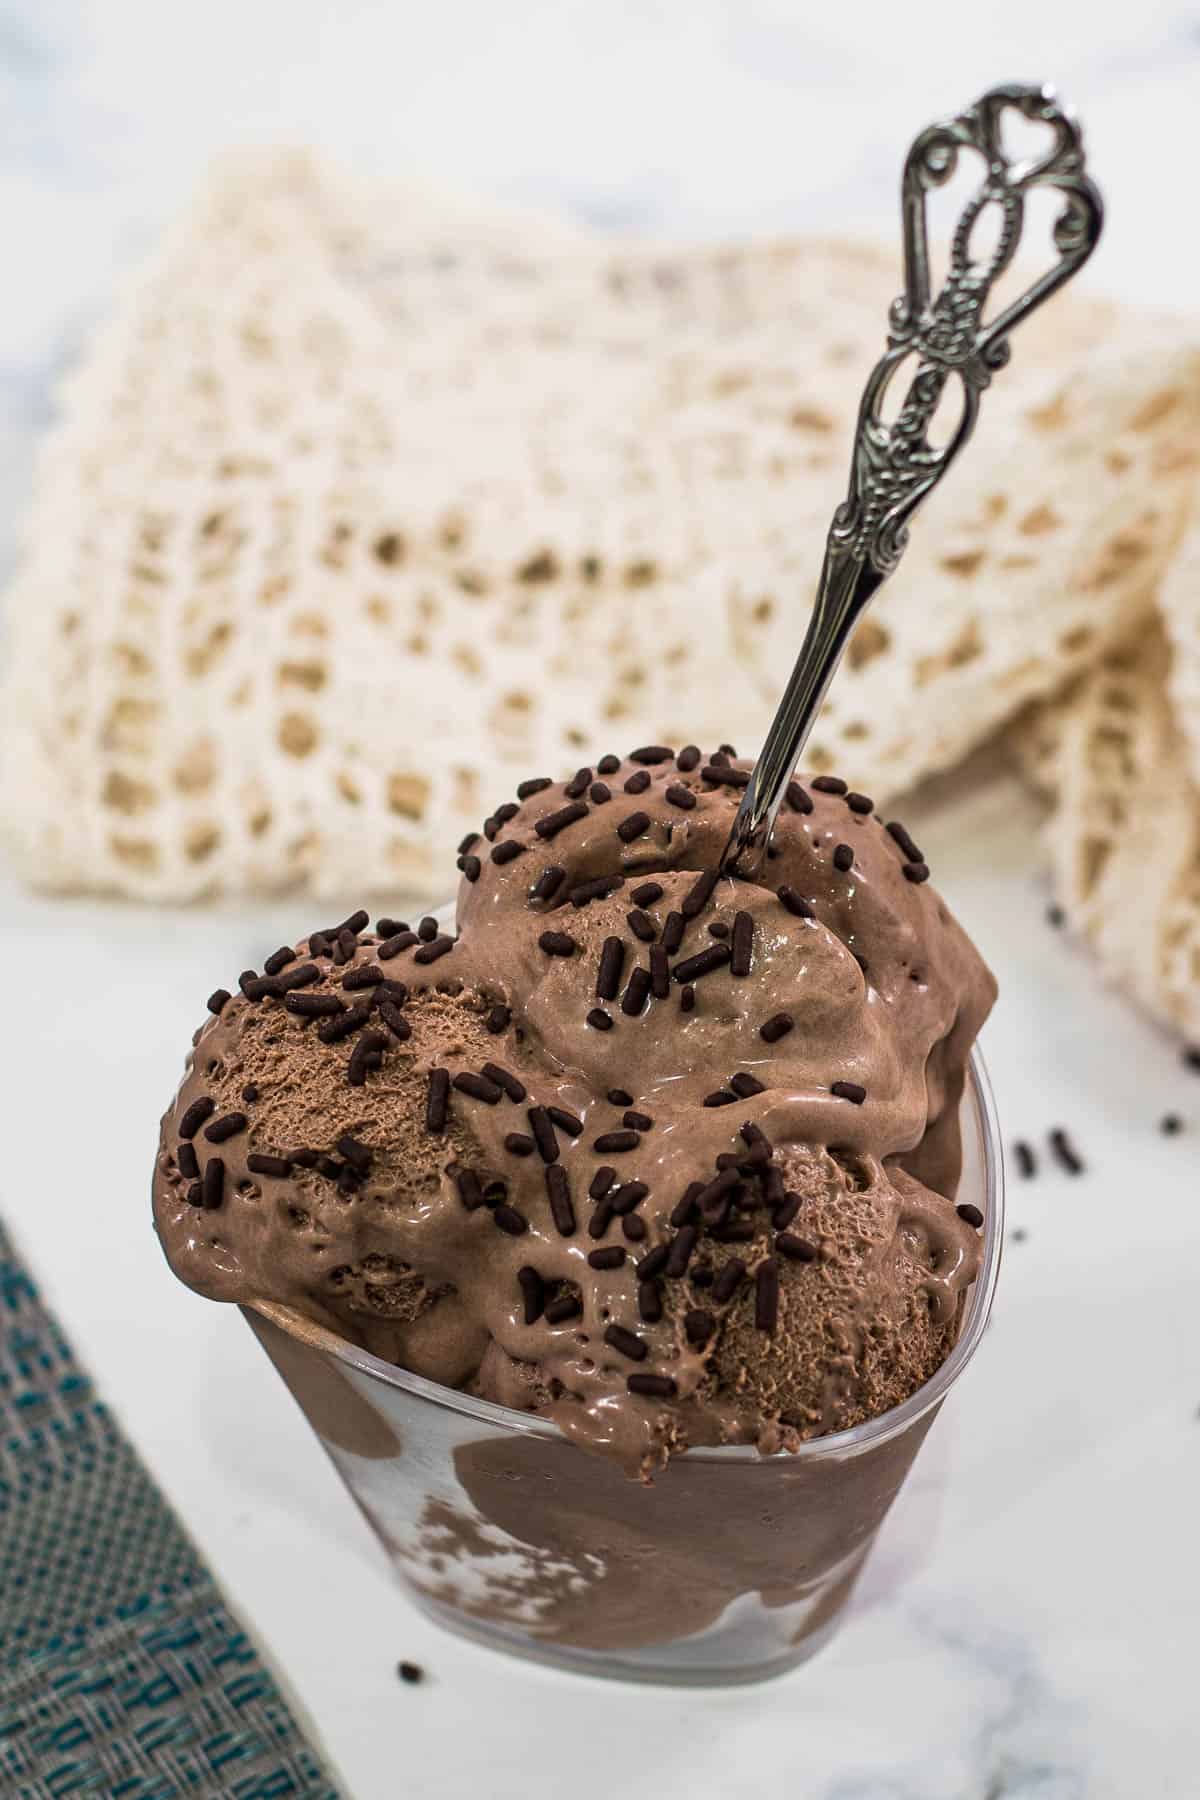 A spoon put into a dessert bowl filled with chocolate ice cream